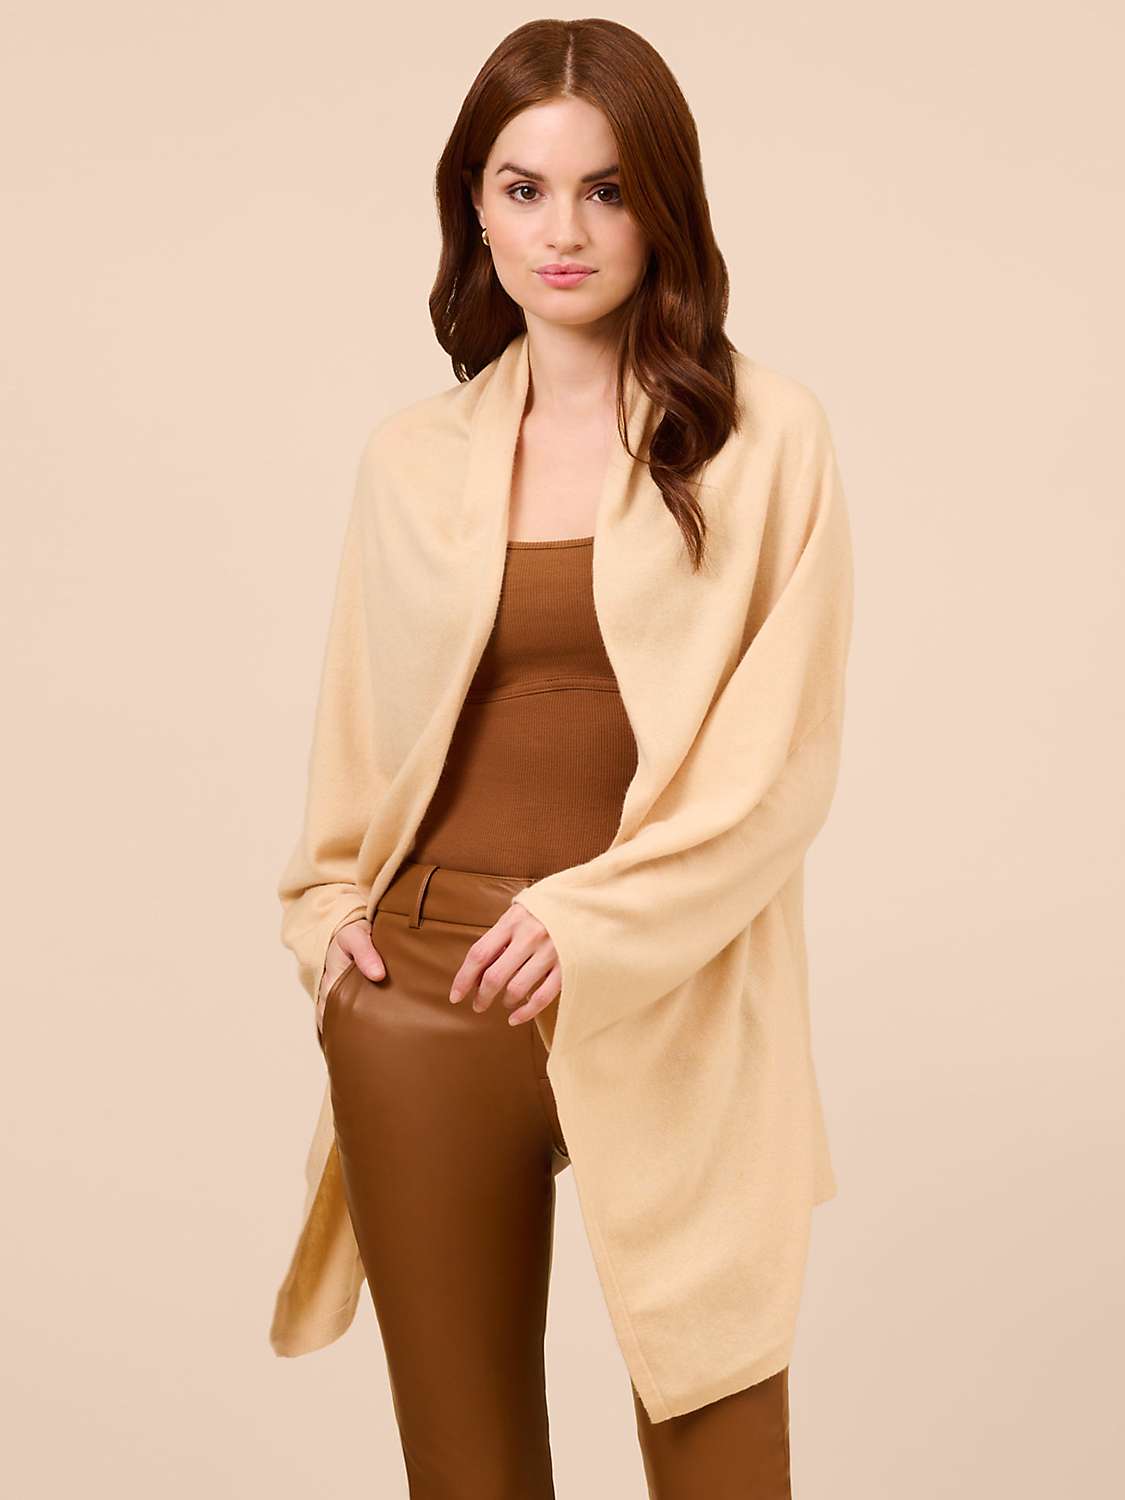 Buy Adrianna Papell Classic Solid Cashmere Blend S’HUG® Cardigan Wrap Online at johnlewis.com